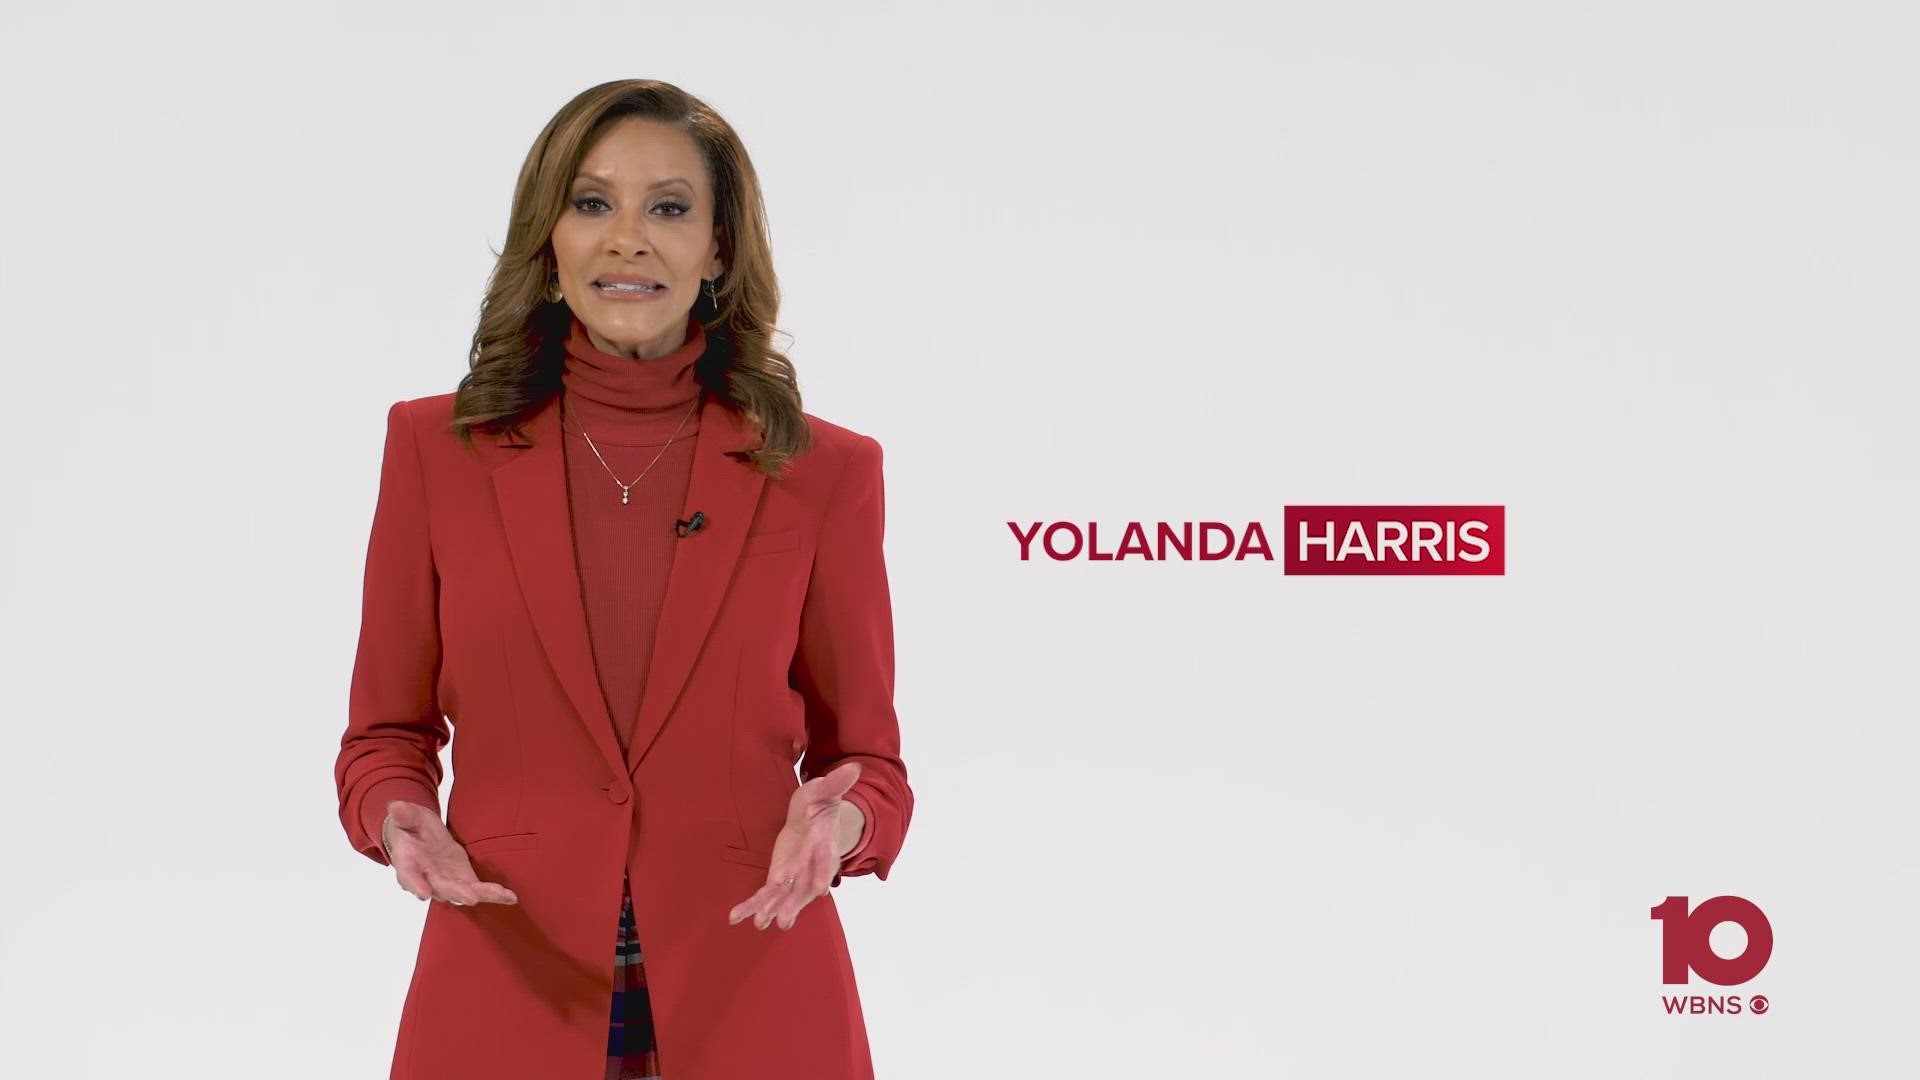 You can join 10TV's Yolanda Harris at the AHA's Go Red for Women Luncheon on Feb. 16 by texting "MY SUPPORT" to 614-450-3345.